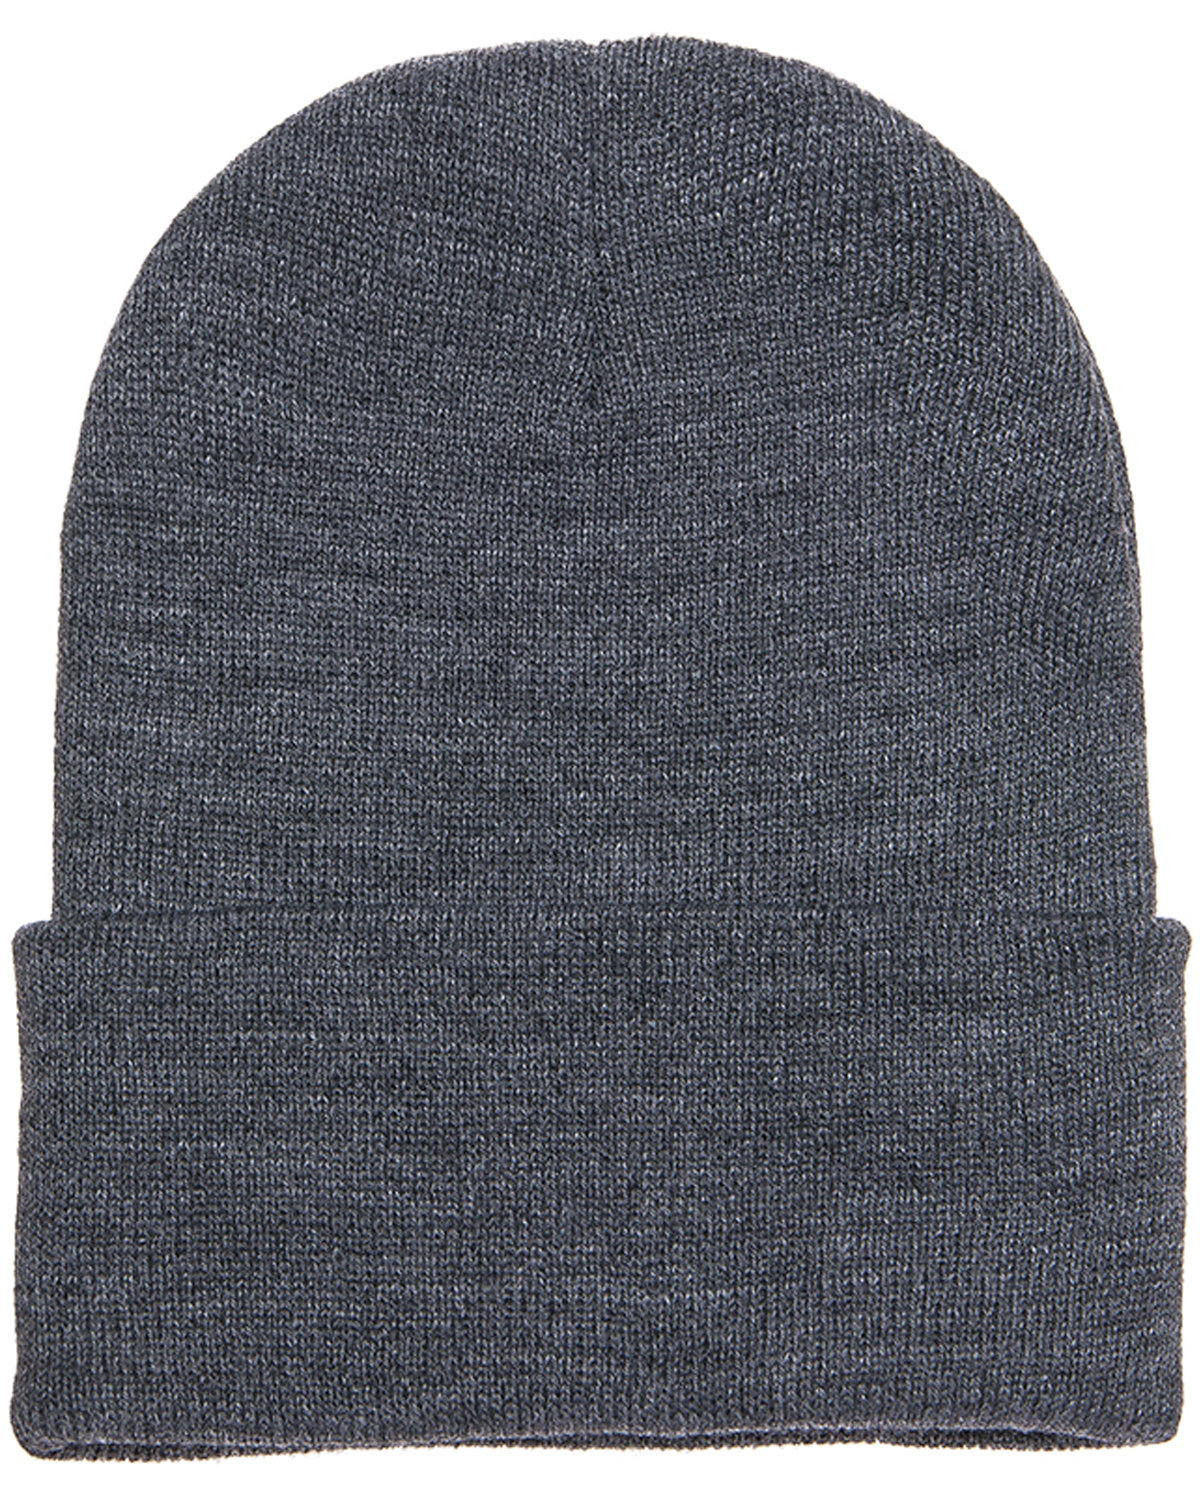 Yupoong Adult Cuffed alphabroder Knit Beanie 